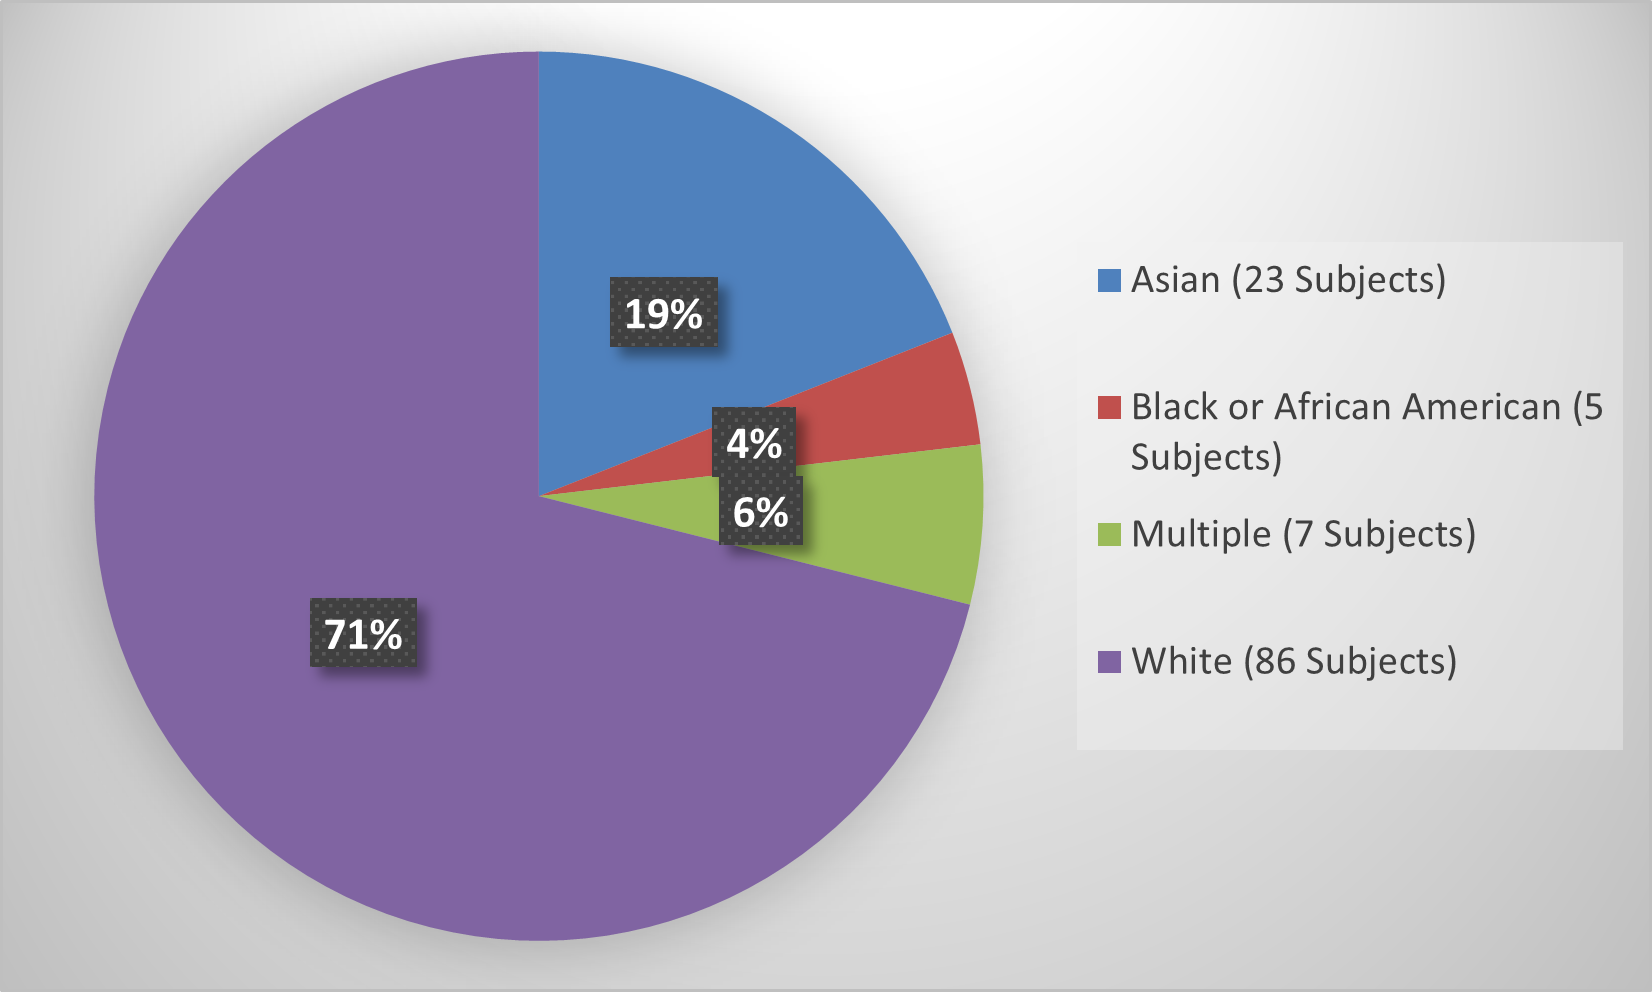 Pie chart summarizing how many White, Black, Asian, and multiple patients were in the clinical trial.  In total, 86 (71%) white patients, 5(4%) black patients, 23(19%) Asian patients, and 7 (6%) multiple patients participated in the clinical trial.